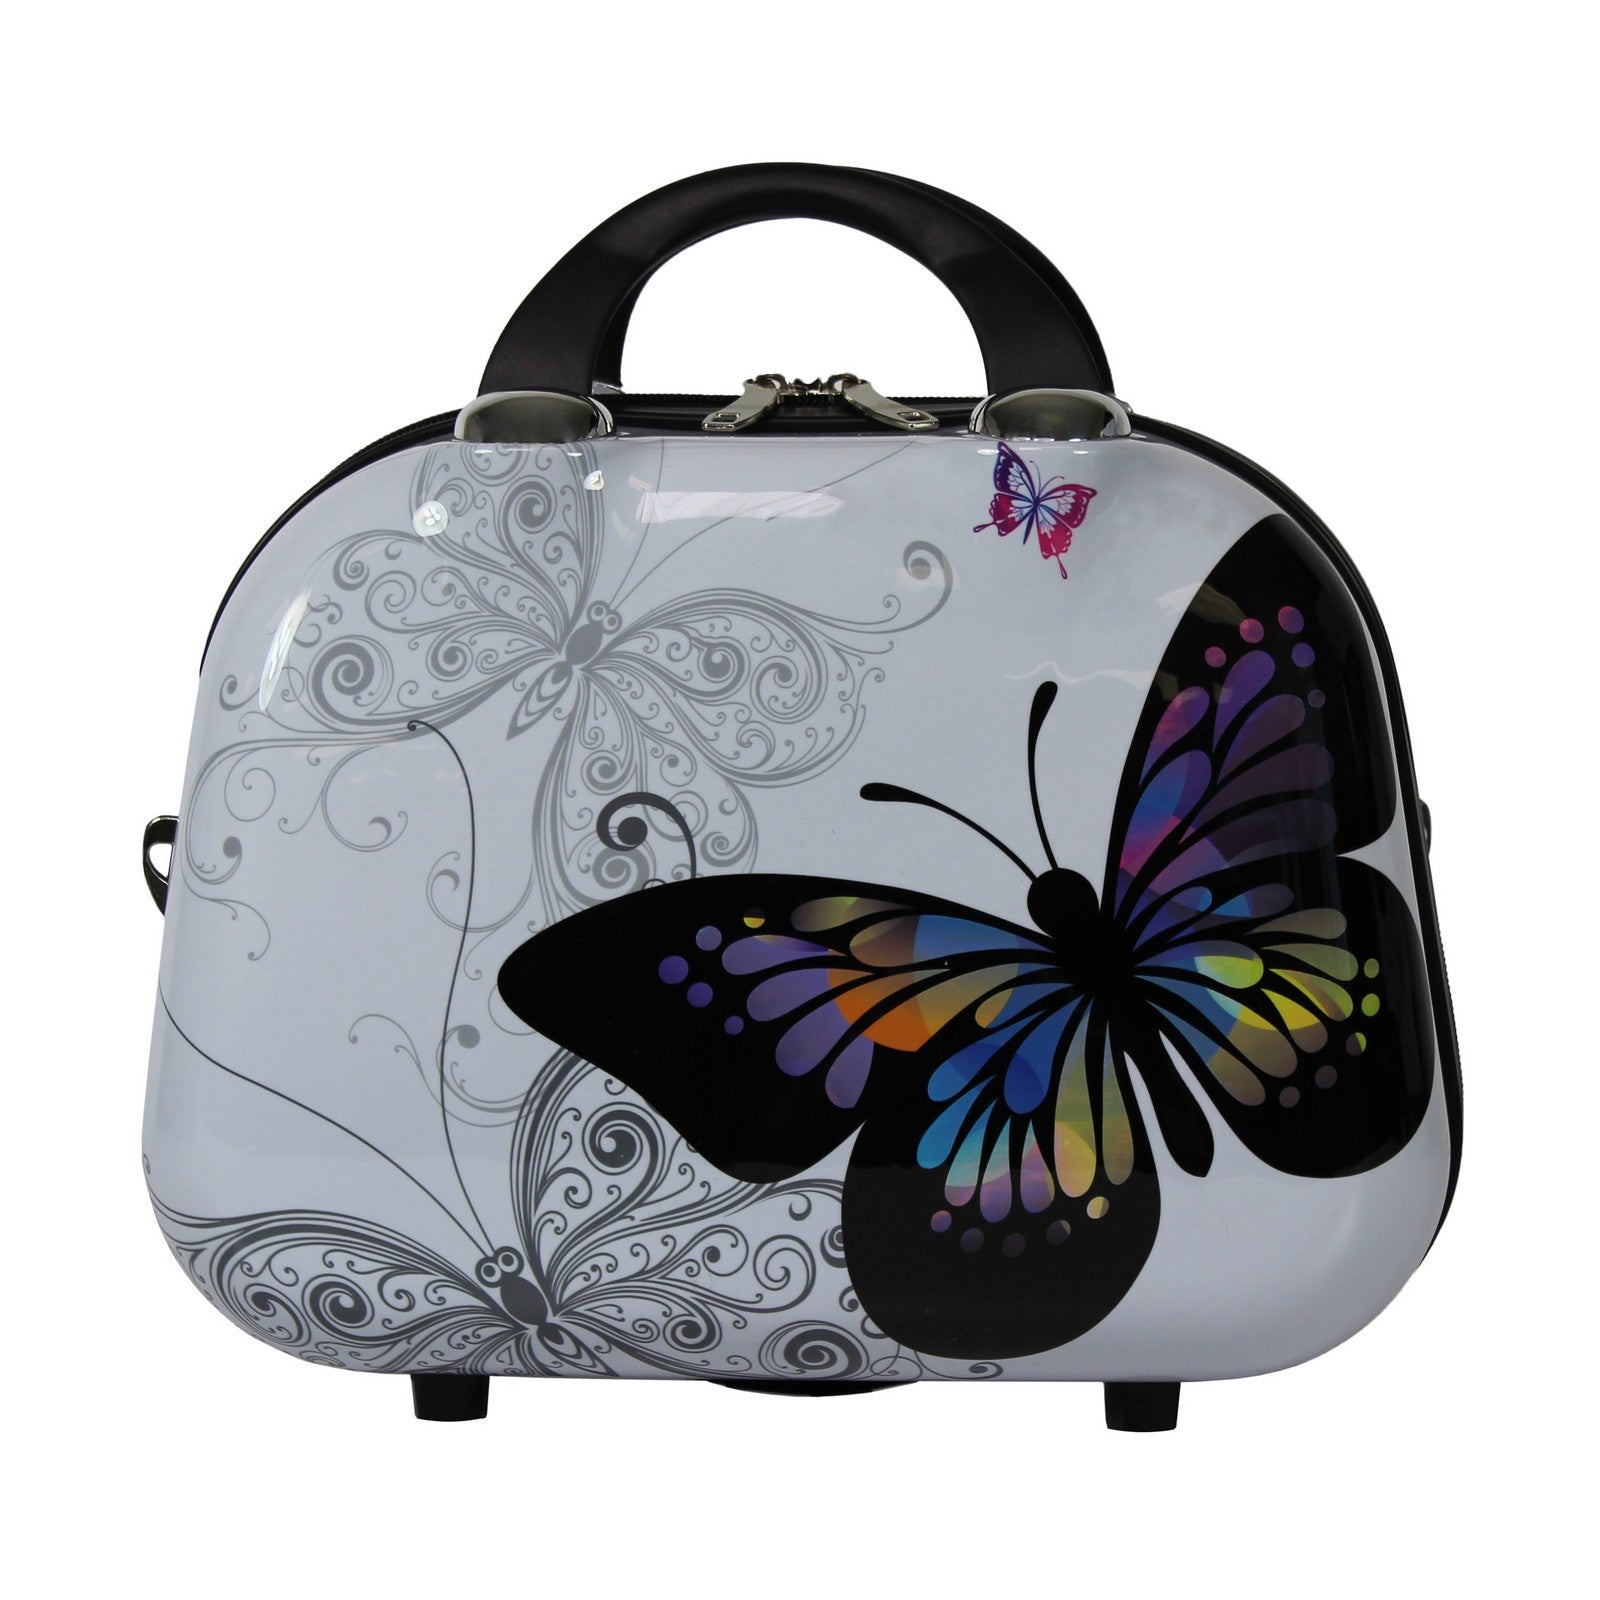 World Traveler Butterfly 13-Inch Hardside Cosmetic Case Shoulder Tote